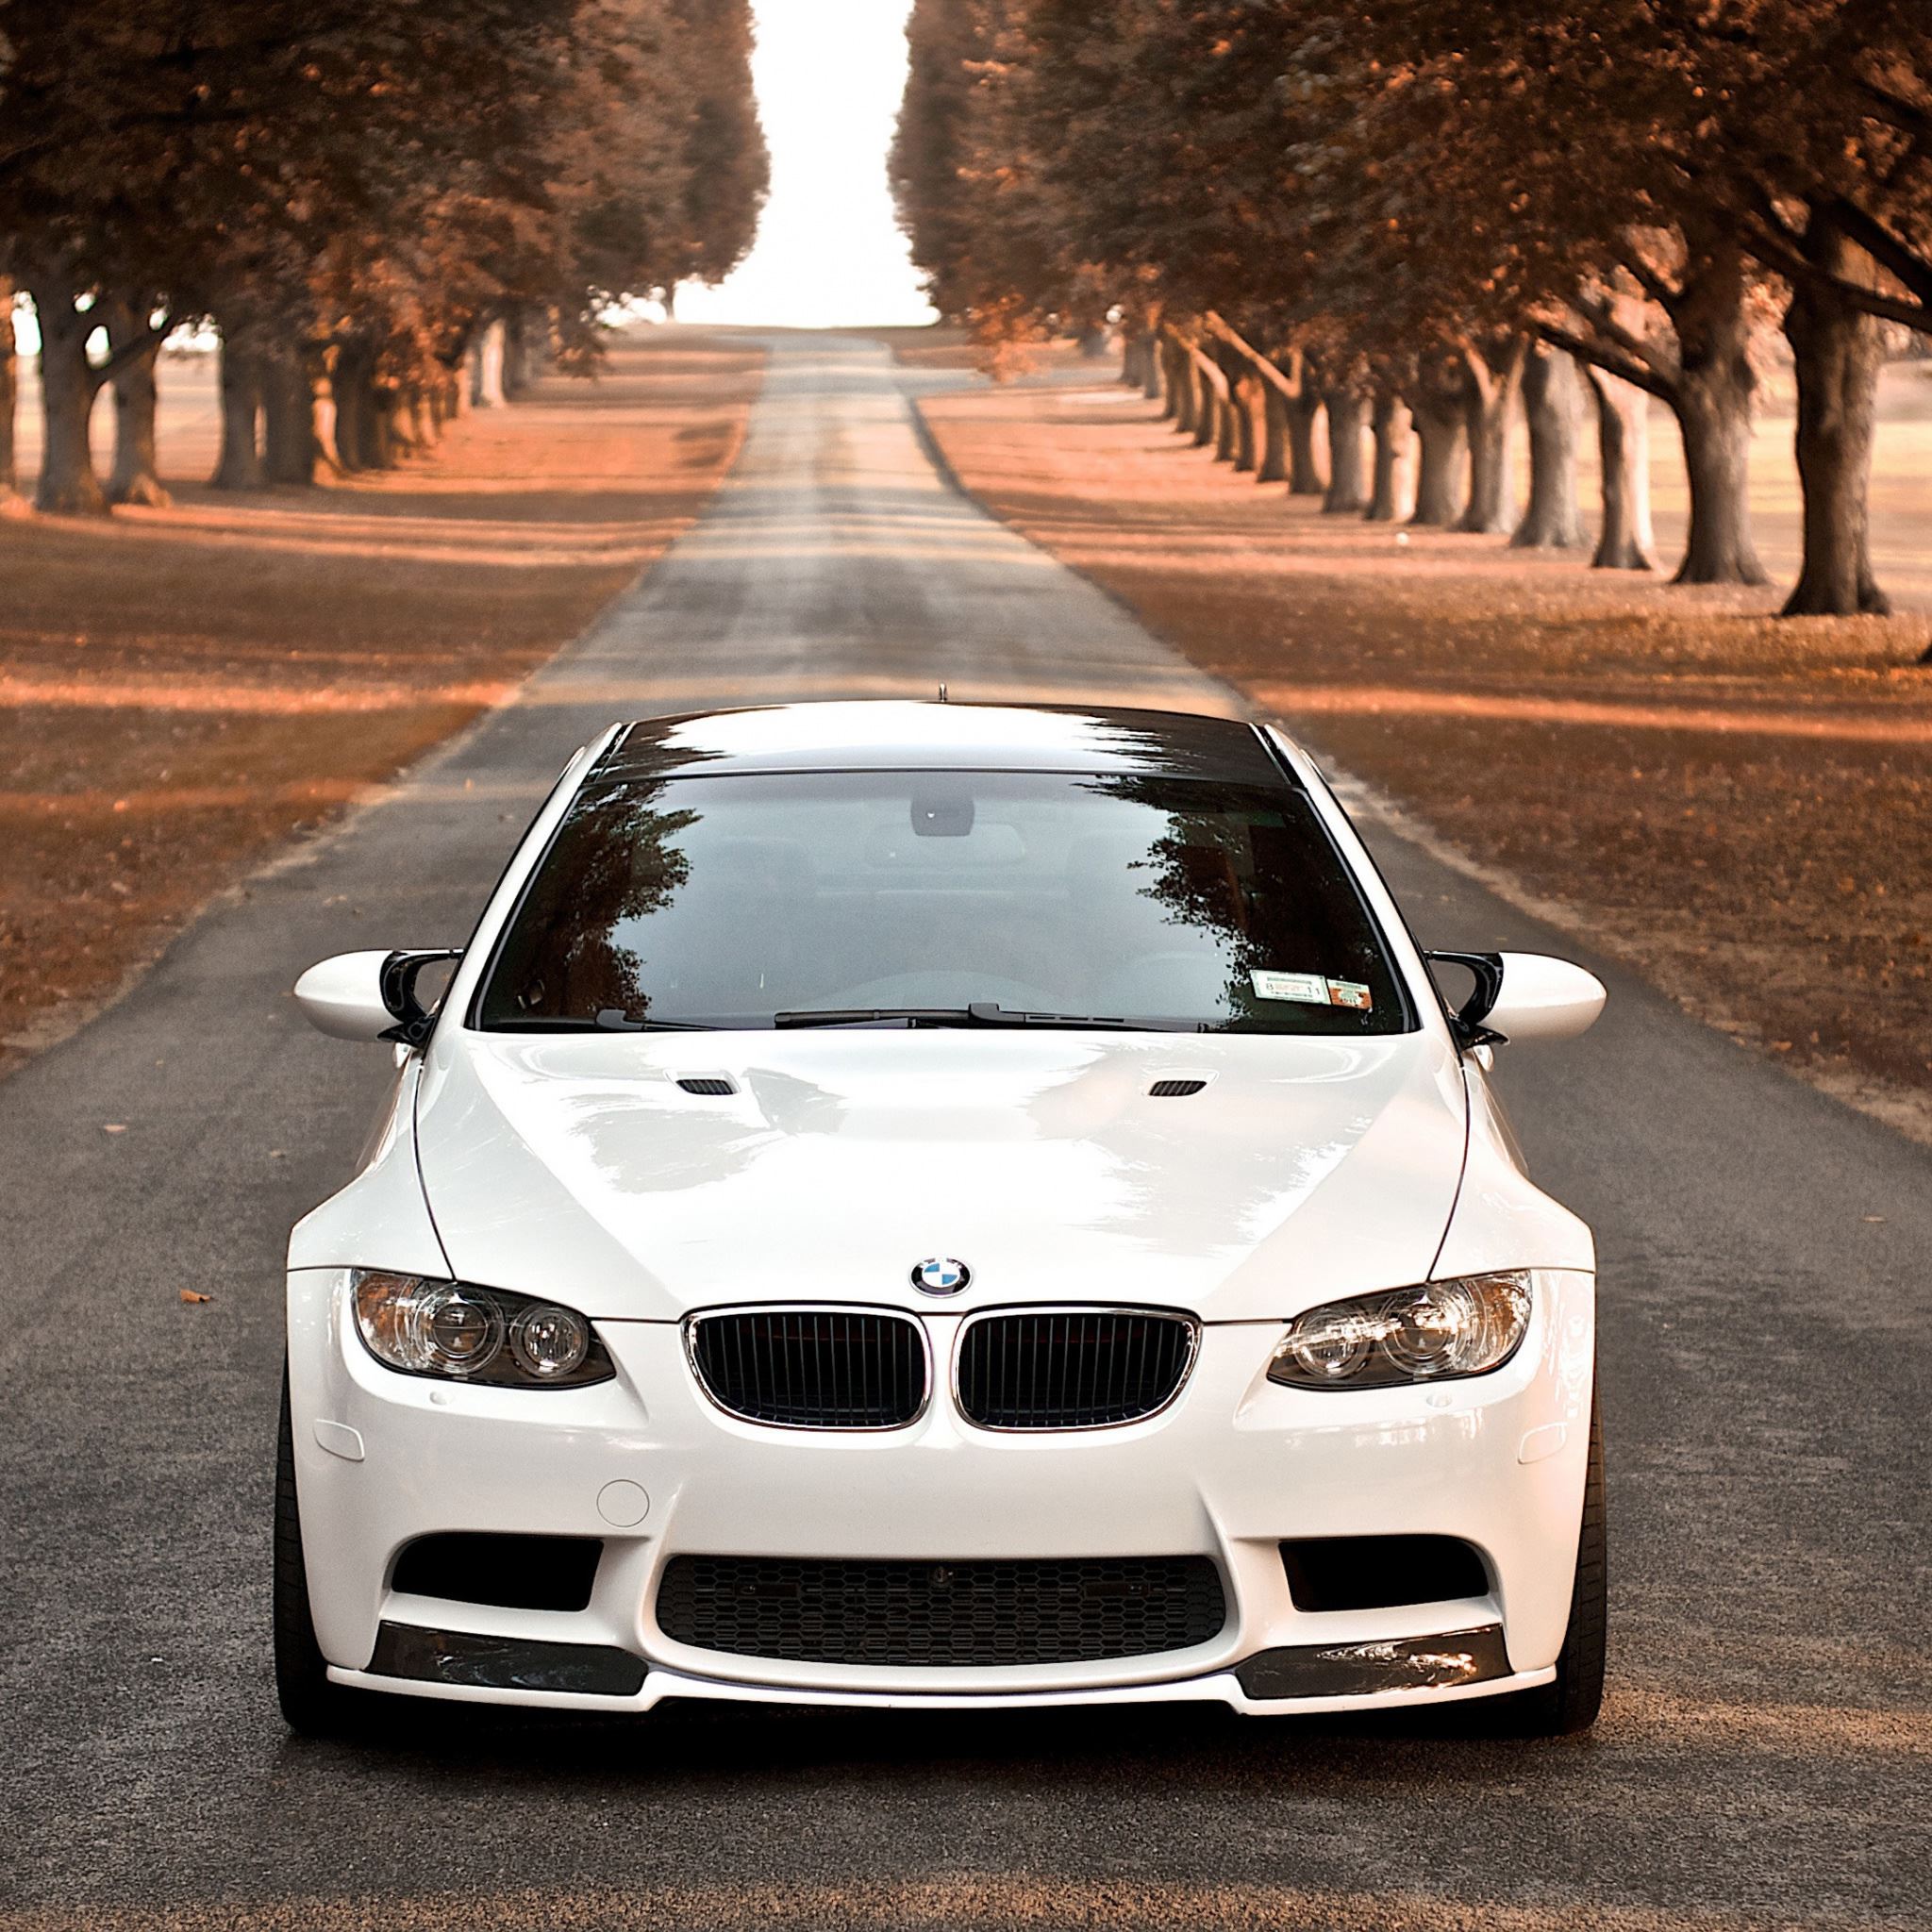 Bmw wallpaper for ipad #6